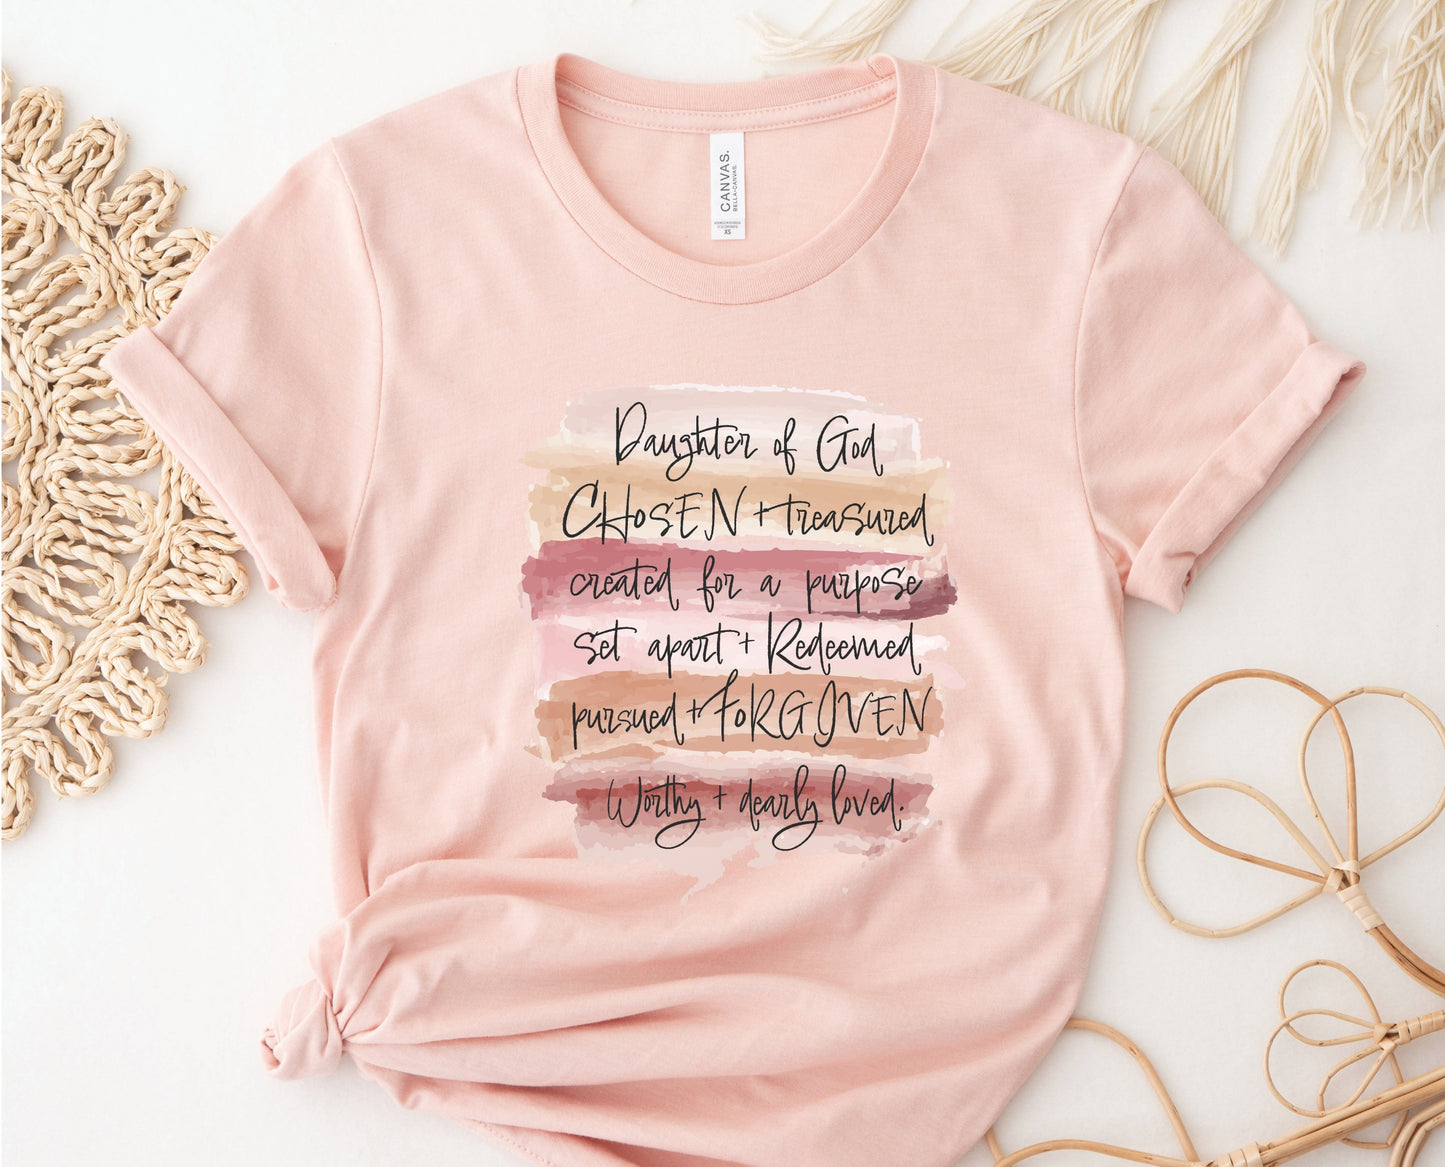 Daughter of God, Chosen, created for a purpose, redeemed, forgiven, worthy, loved, Christian woman aesthetic with neutral colors watercolor splash background printed on soft heather prism peach unisex t-shirt for women